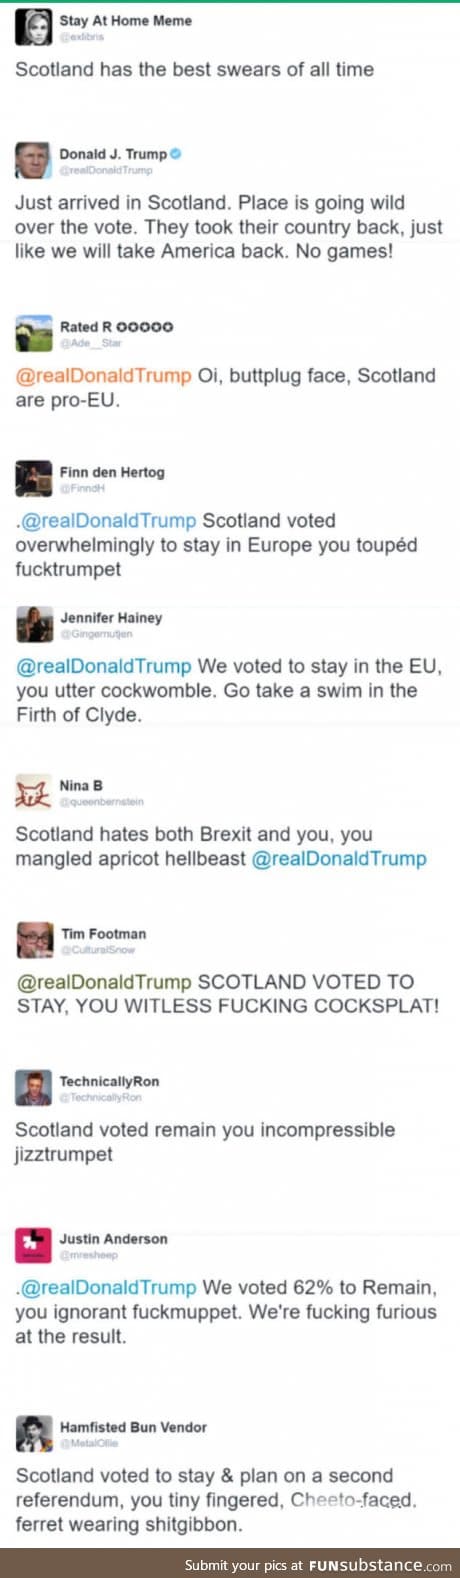 Scottish insults are the best